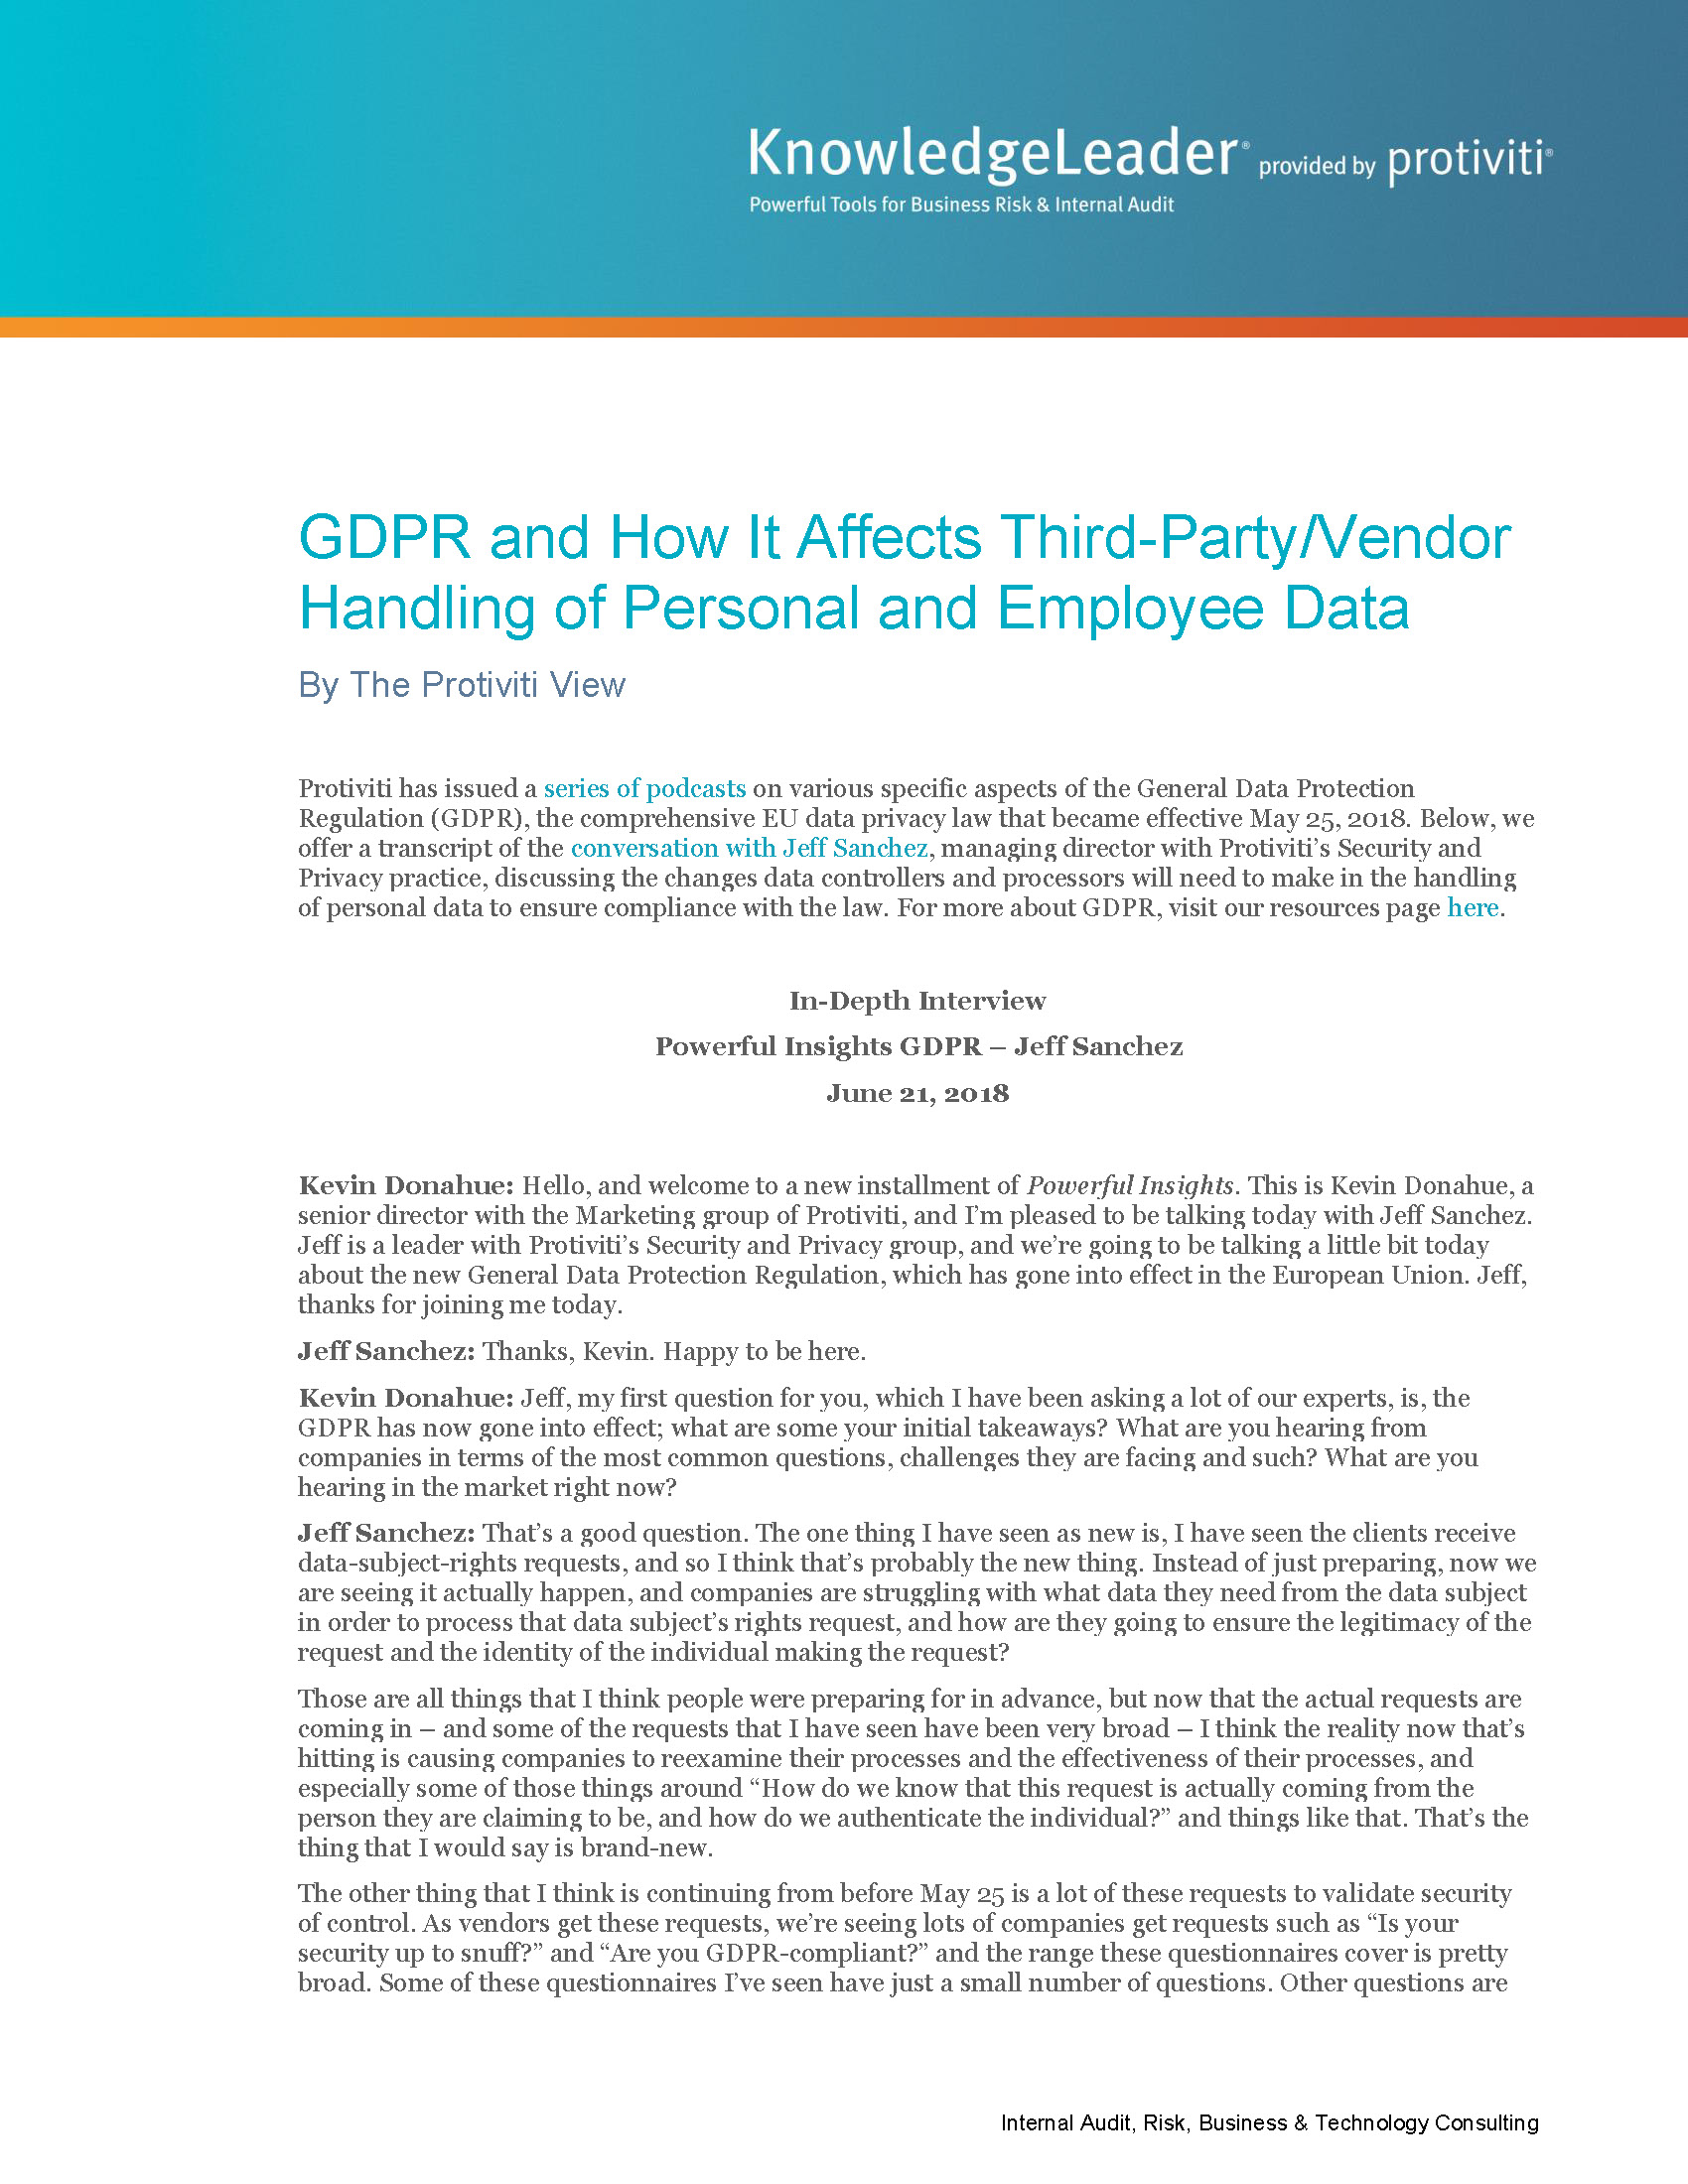 Screenshot of the first page of GDPR and How It Affects Third-Party Vendor Handling of Personal and Employee Data